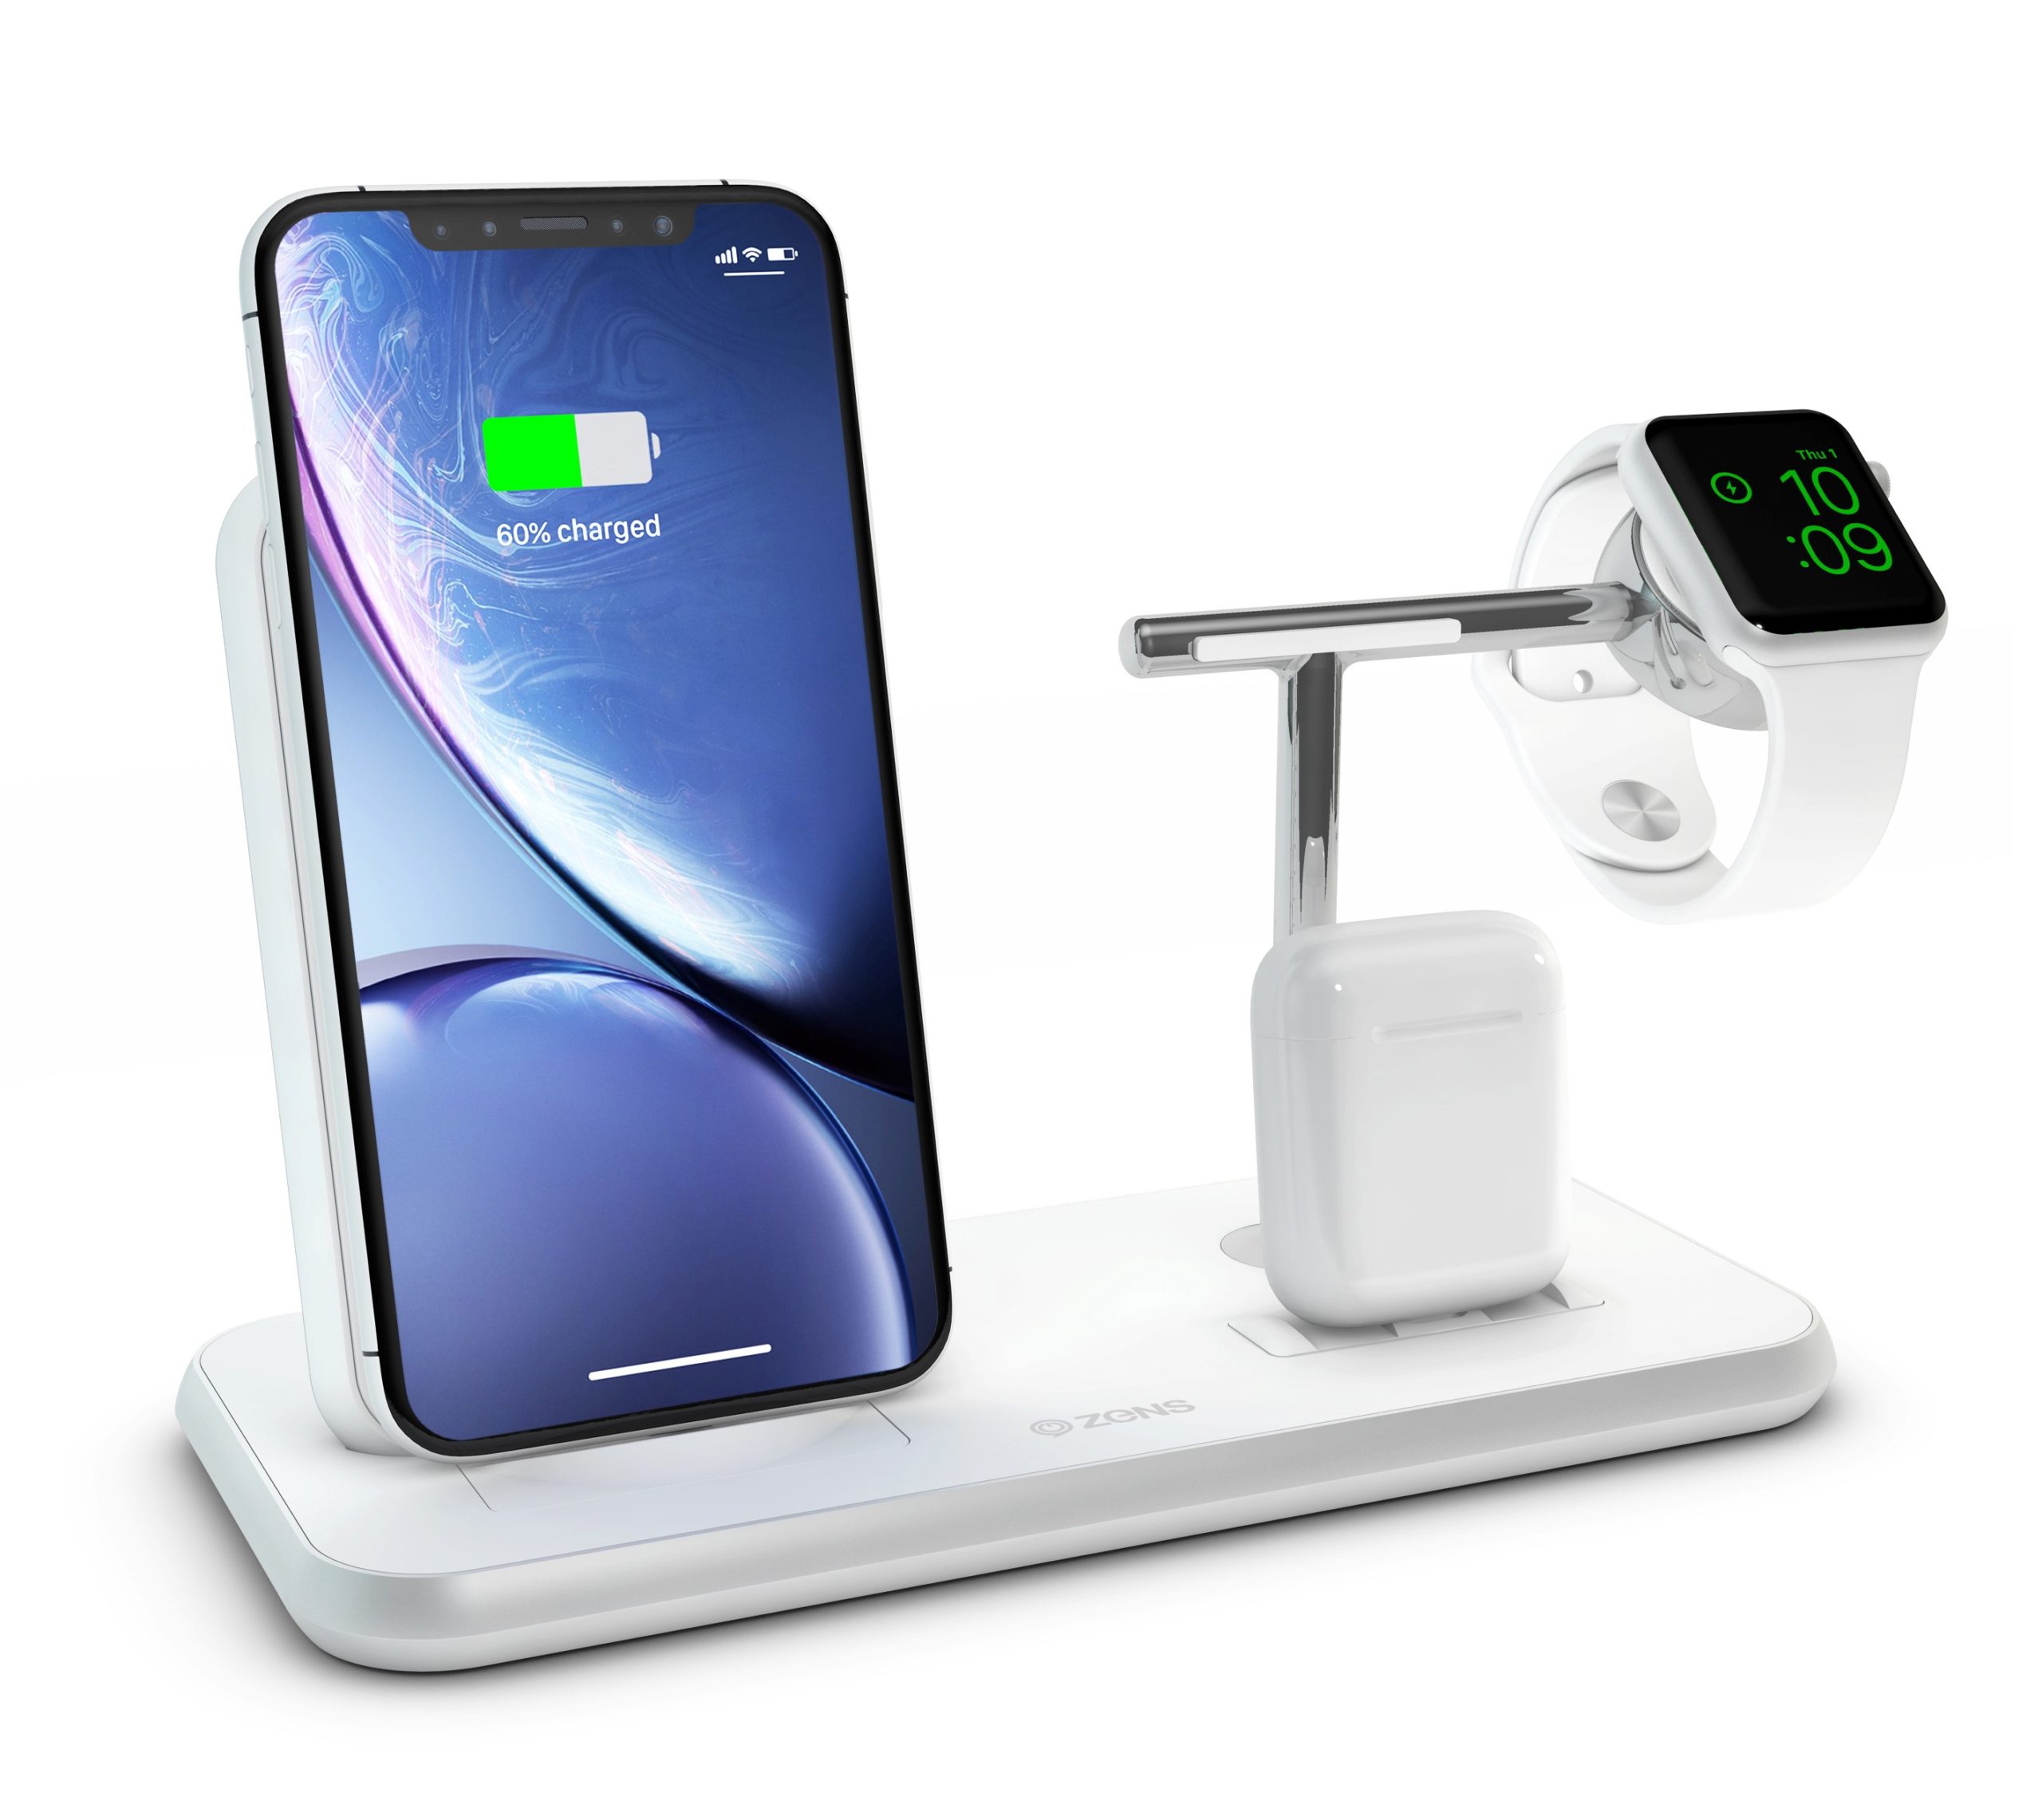 ZEDC07W - ZENS Stand+Dock+Watch Aluminium Wireless Charger White with Apple Watch, iPhone and AirPods